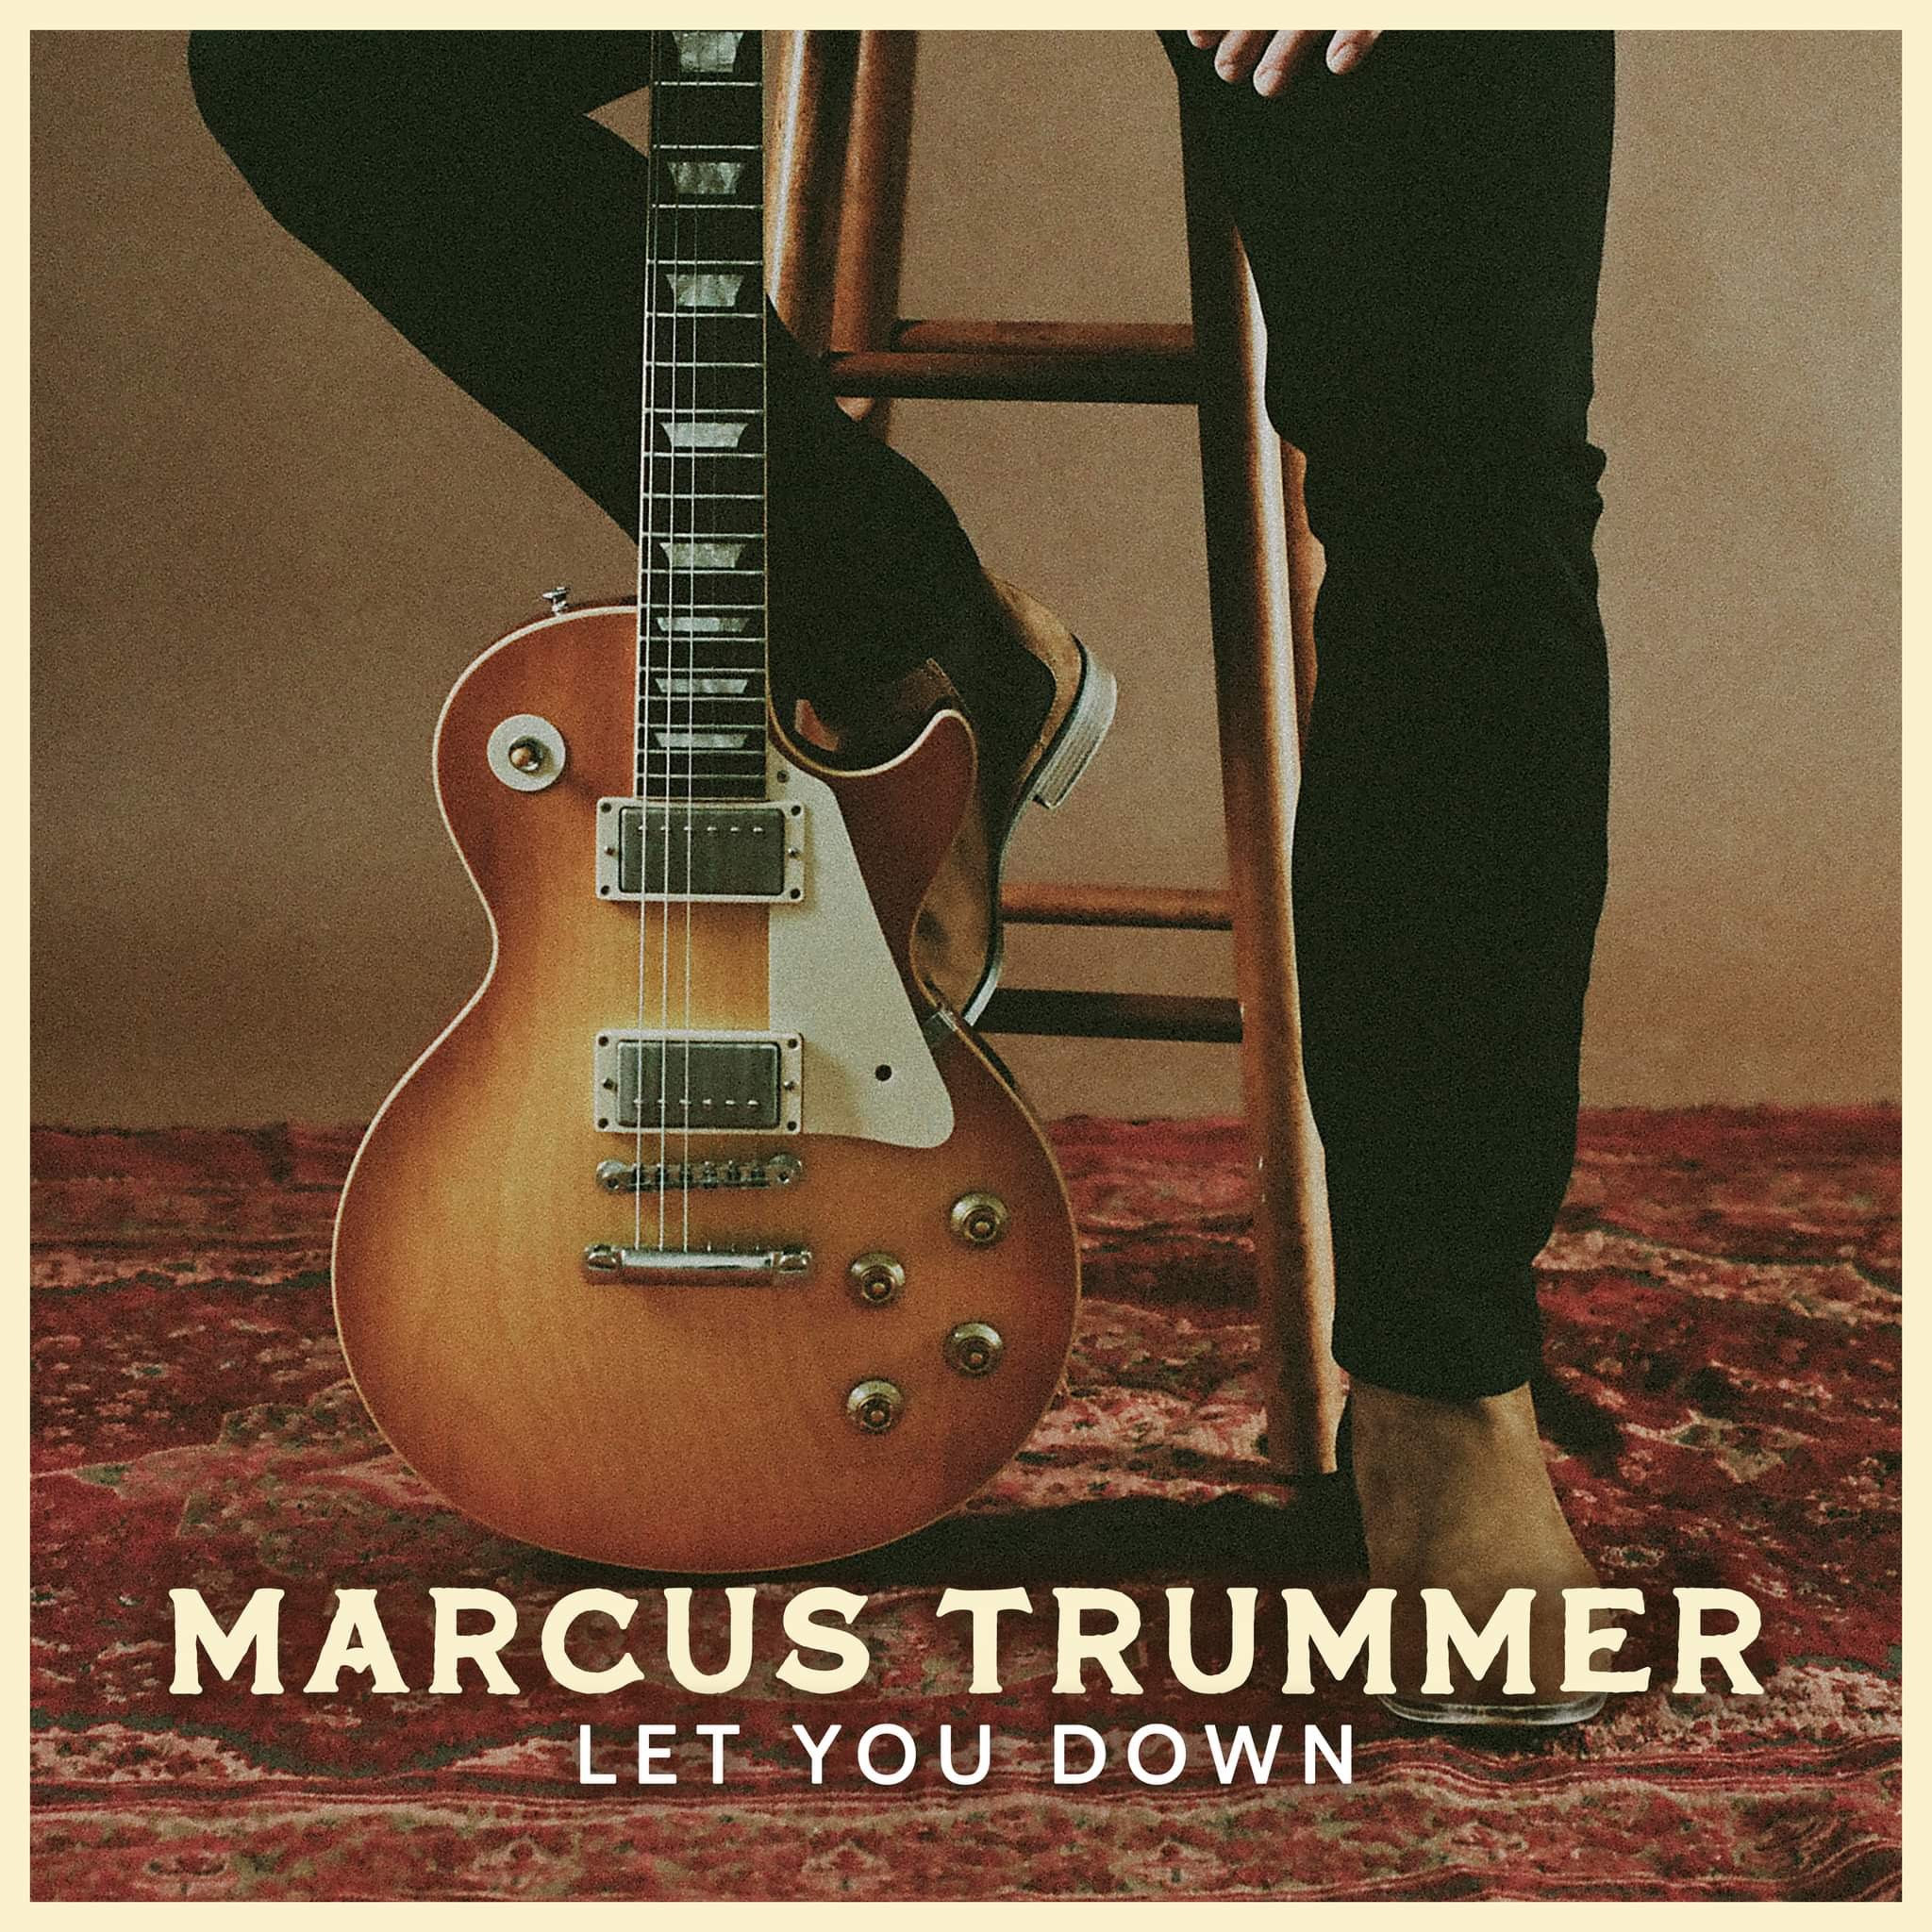 Canadian Blues, Soul, and Rock Guitarist Marcus Trummer Releases New Single “Let You Down”